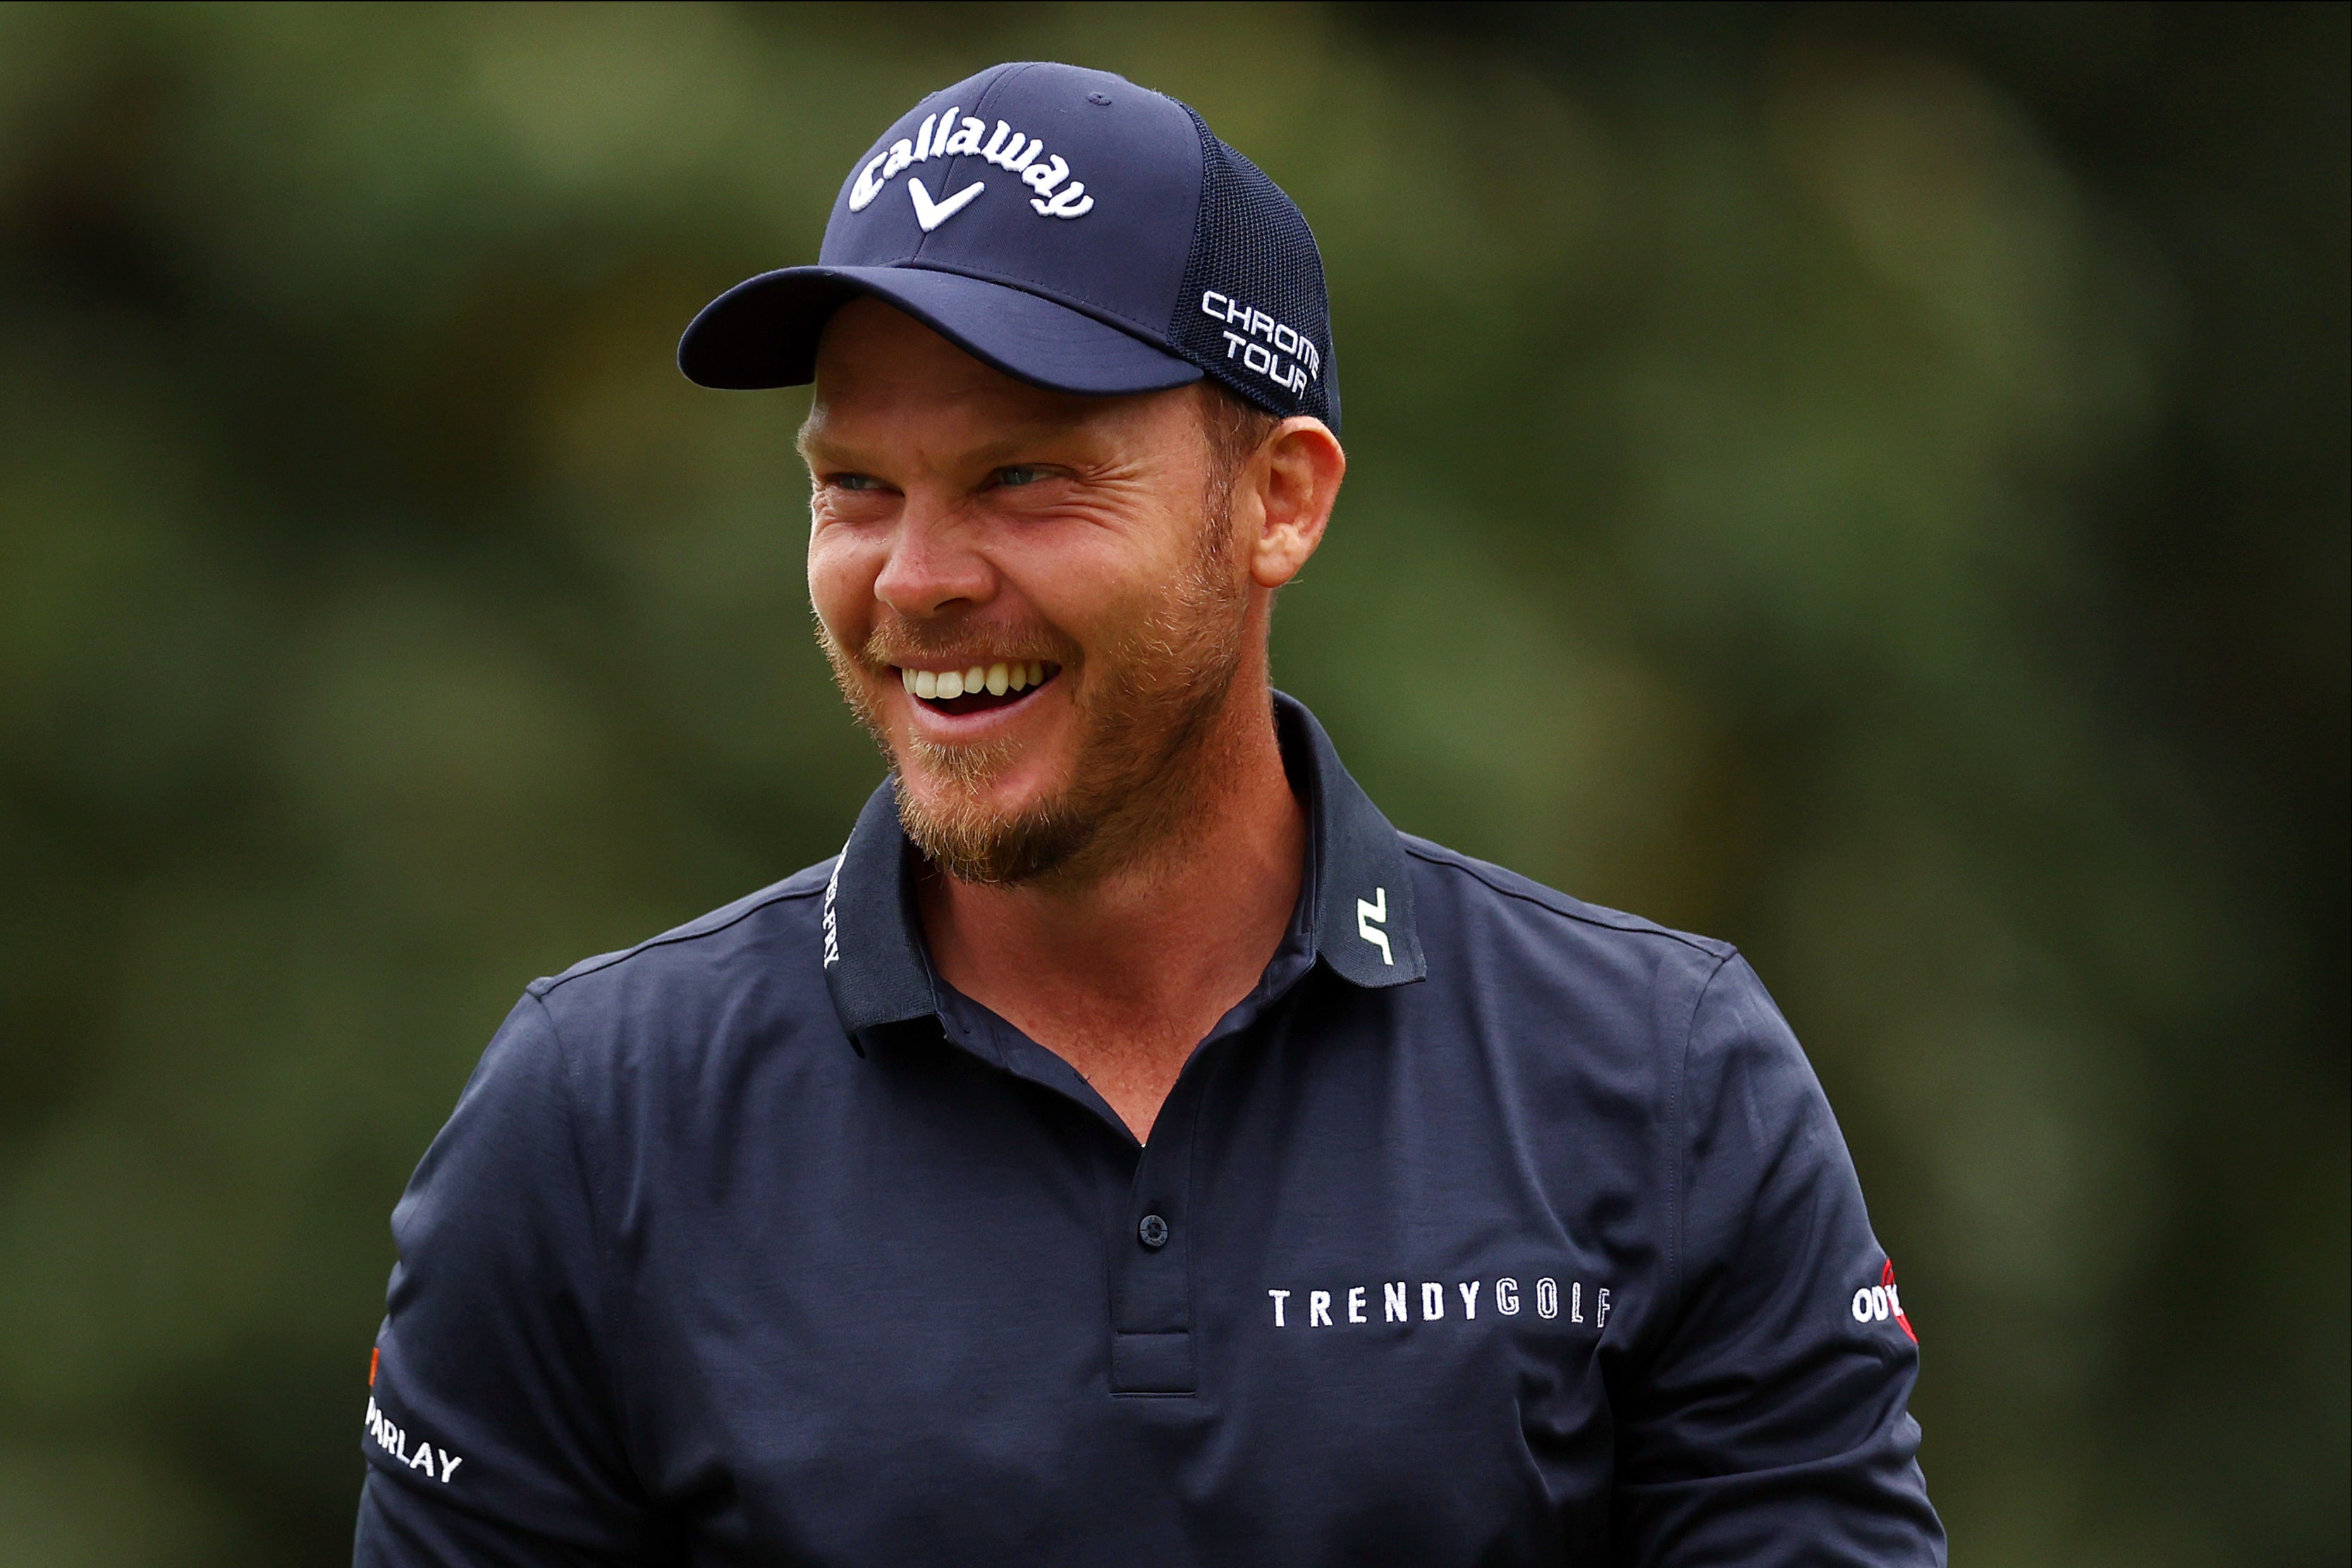 Danny Willett shot a four-under-par 68 in round one of The Masters